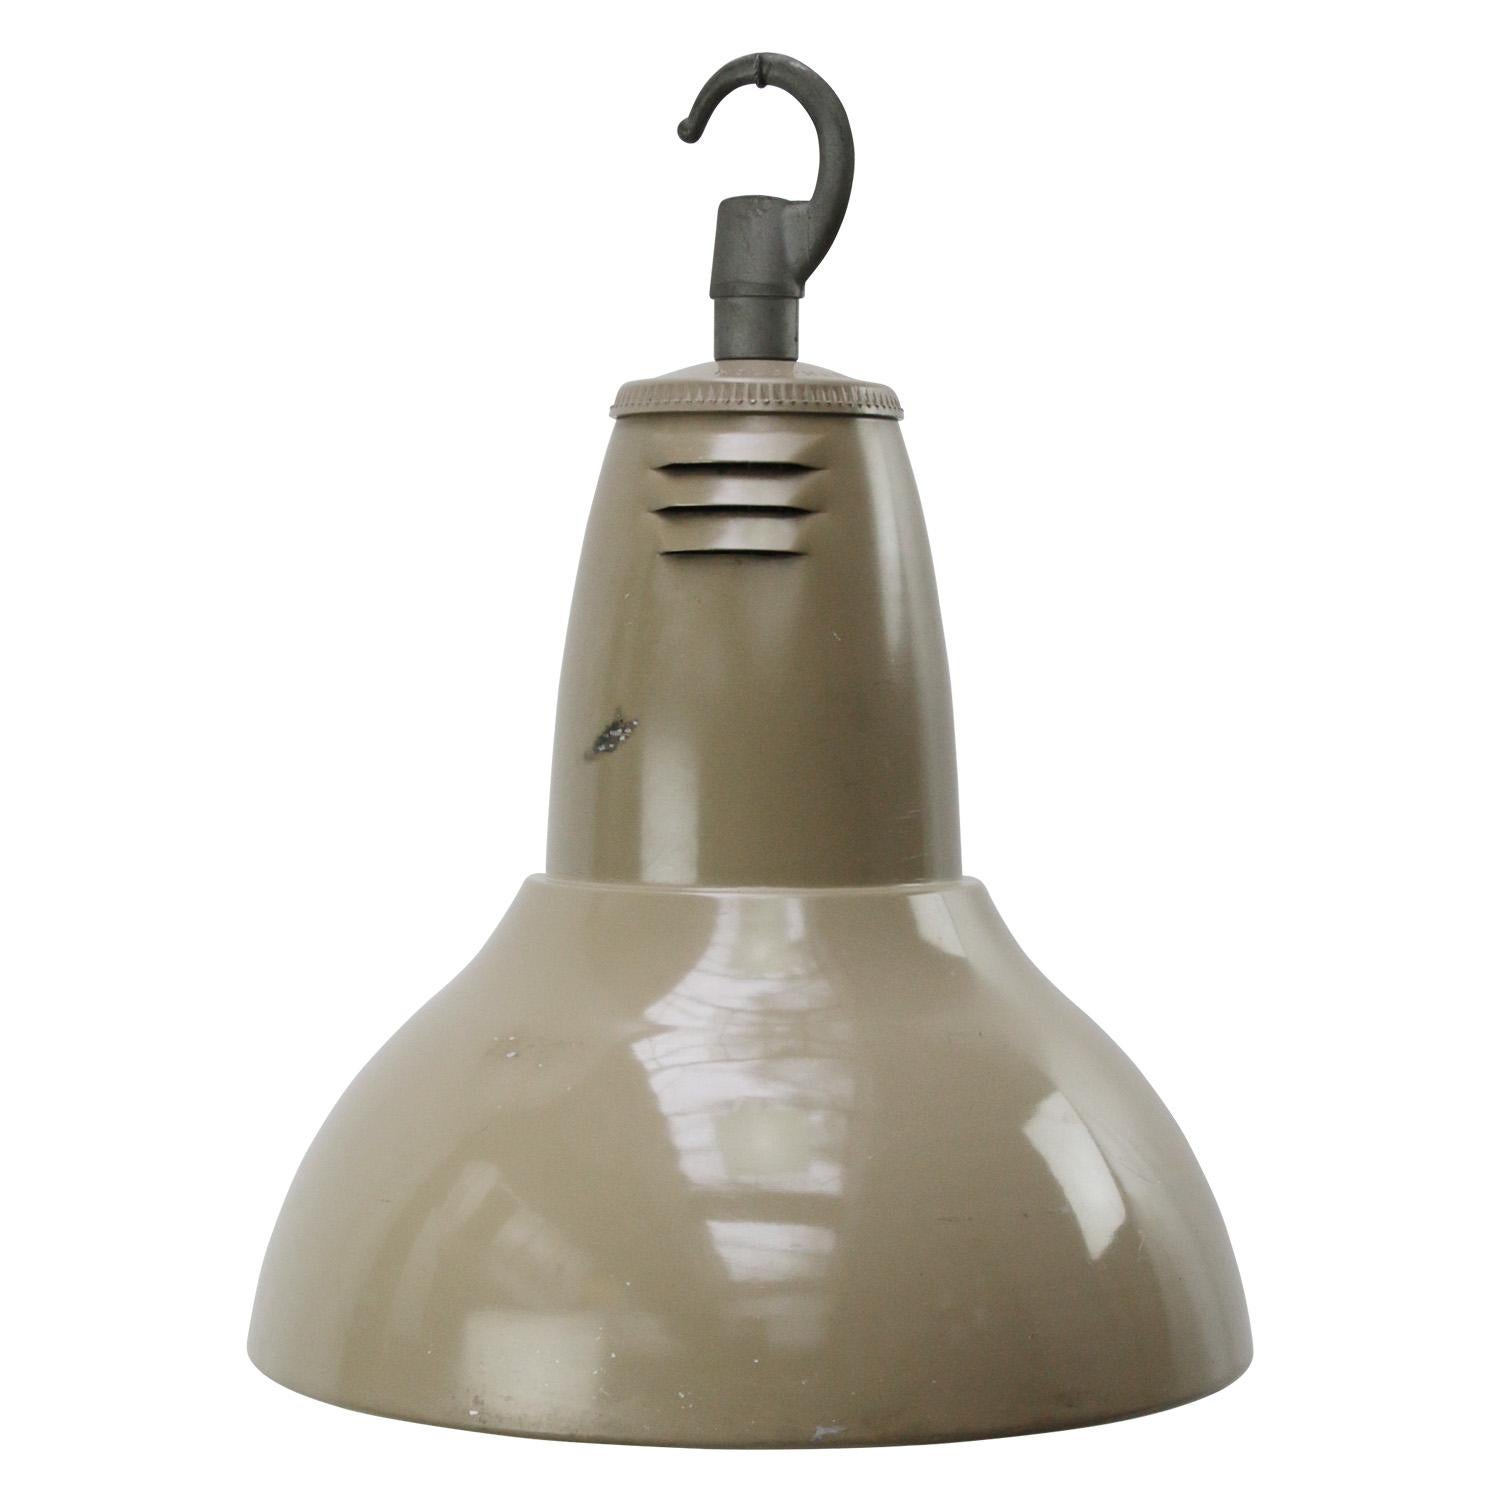 Industrial pendant lamp by Holophane Paris
Beige metal shade with clear striped / holophane glass
Metal top

Weight 3.75 kg / 8.3 lb

Priced per individual item. All lamps have been made suitable by international standards for incandescent